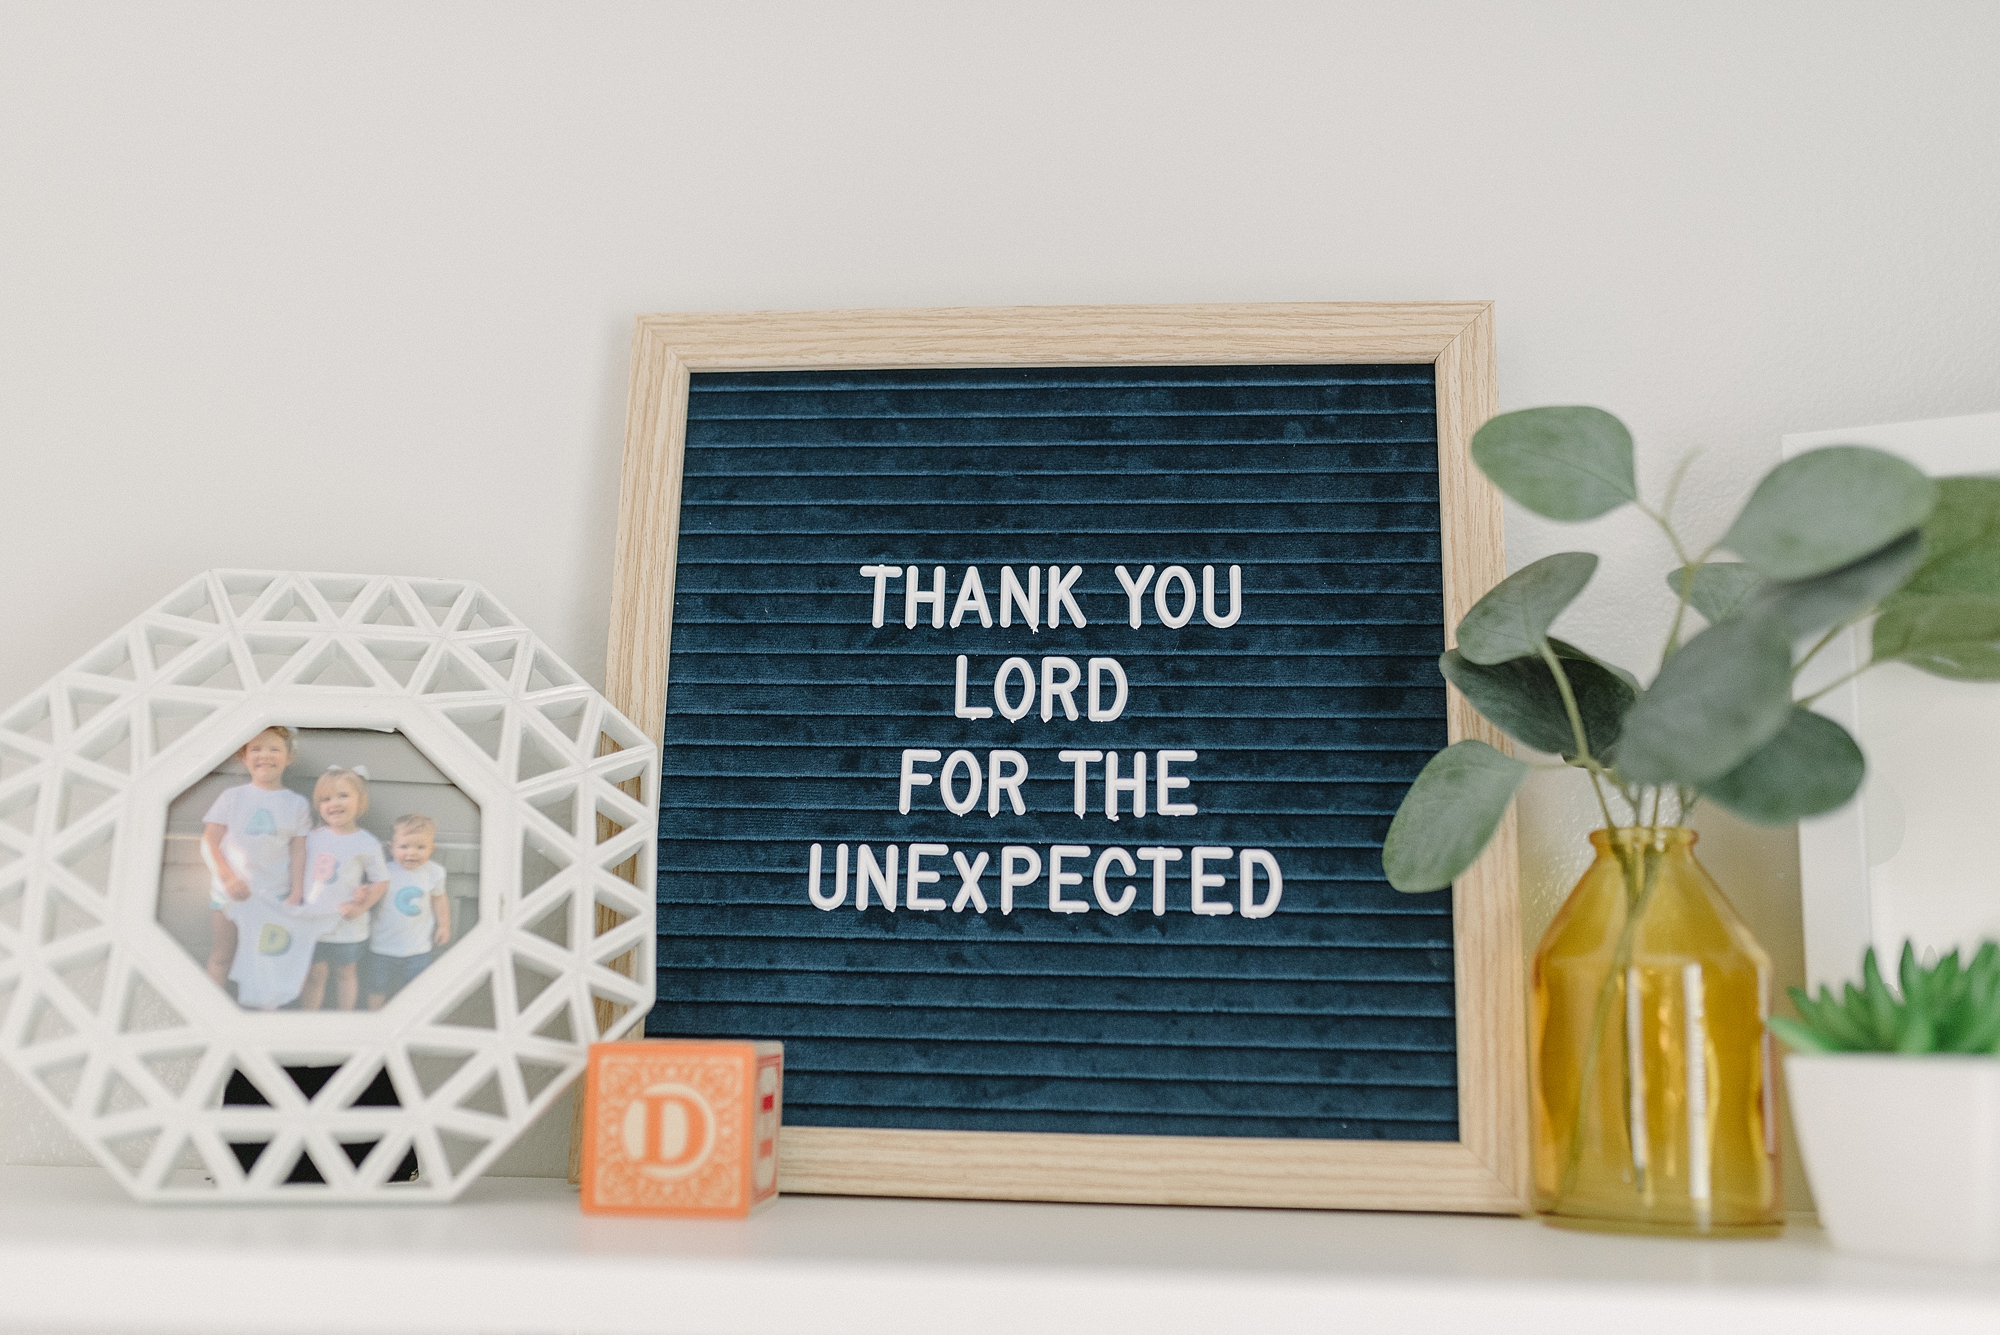 Thank you Lord for the unexpected letter board sign